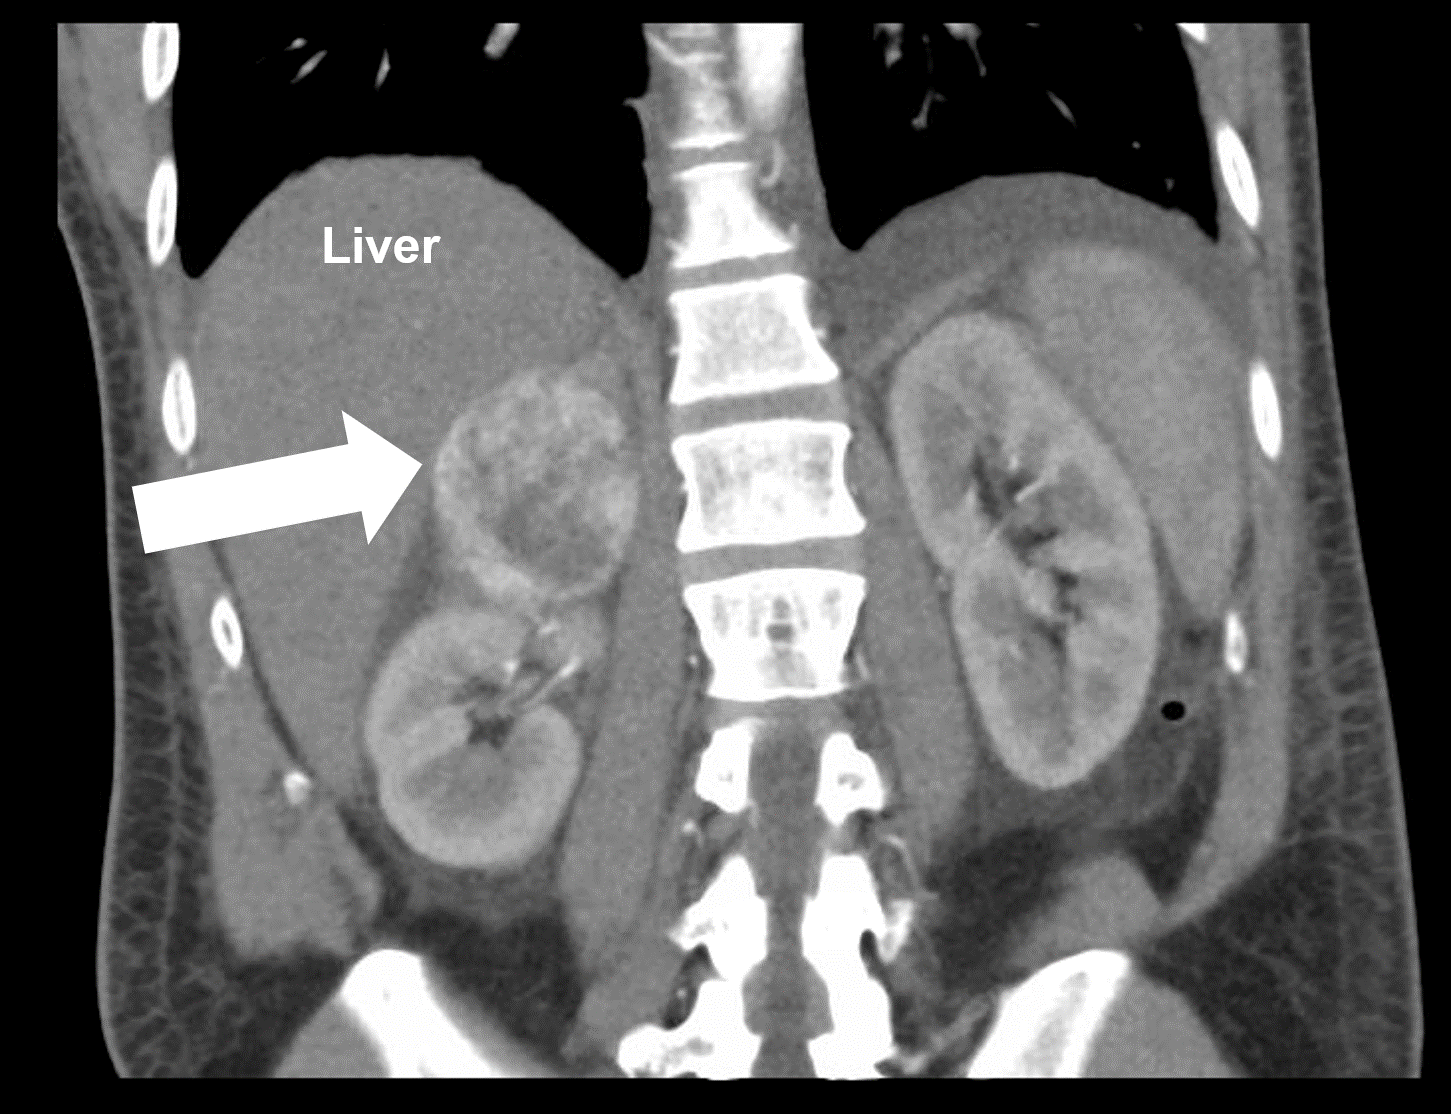 A right adrenal tumor (arrow) seen on a CT scan. This proved to be a pheochromocytoma (too much adrenaline hormone production)